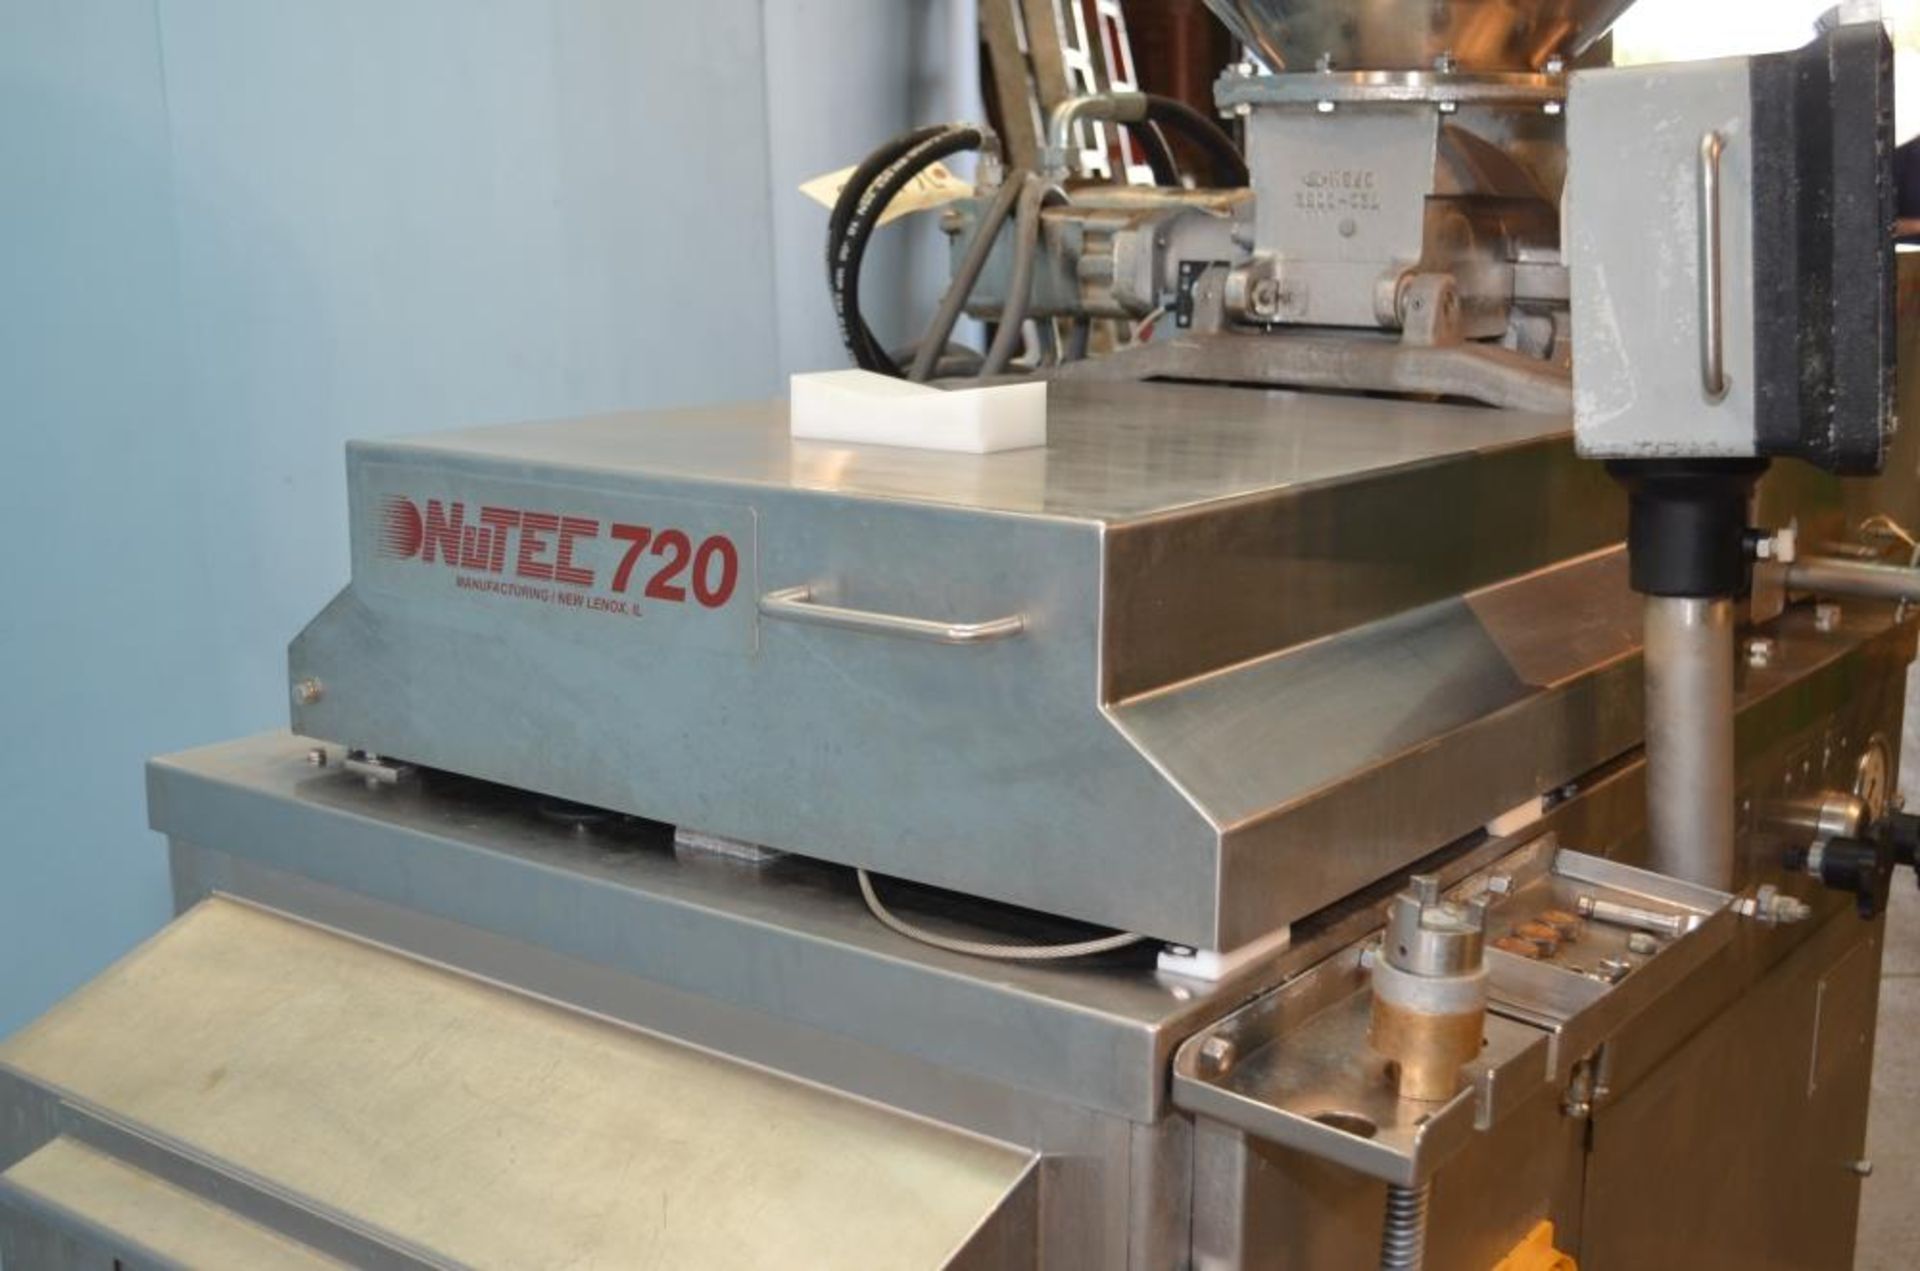 Nutec Mdl. 720 Portable Patty Forming Machine, hydraulic operation, vane pump forming station, 15-65 - Image 14 of 28